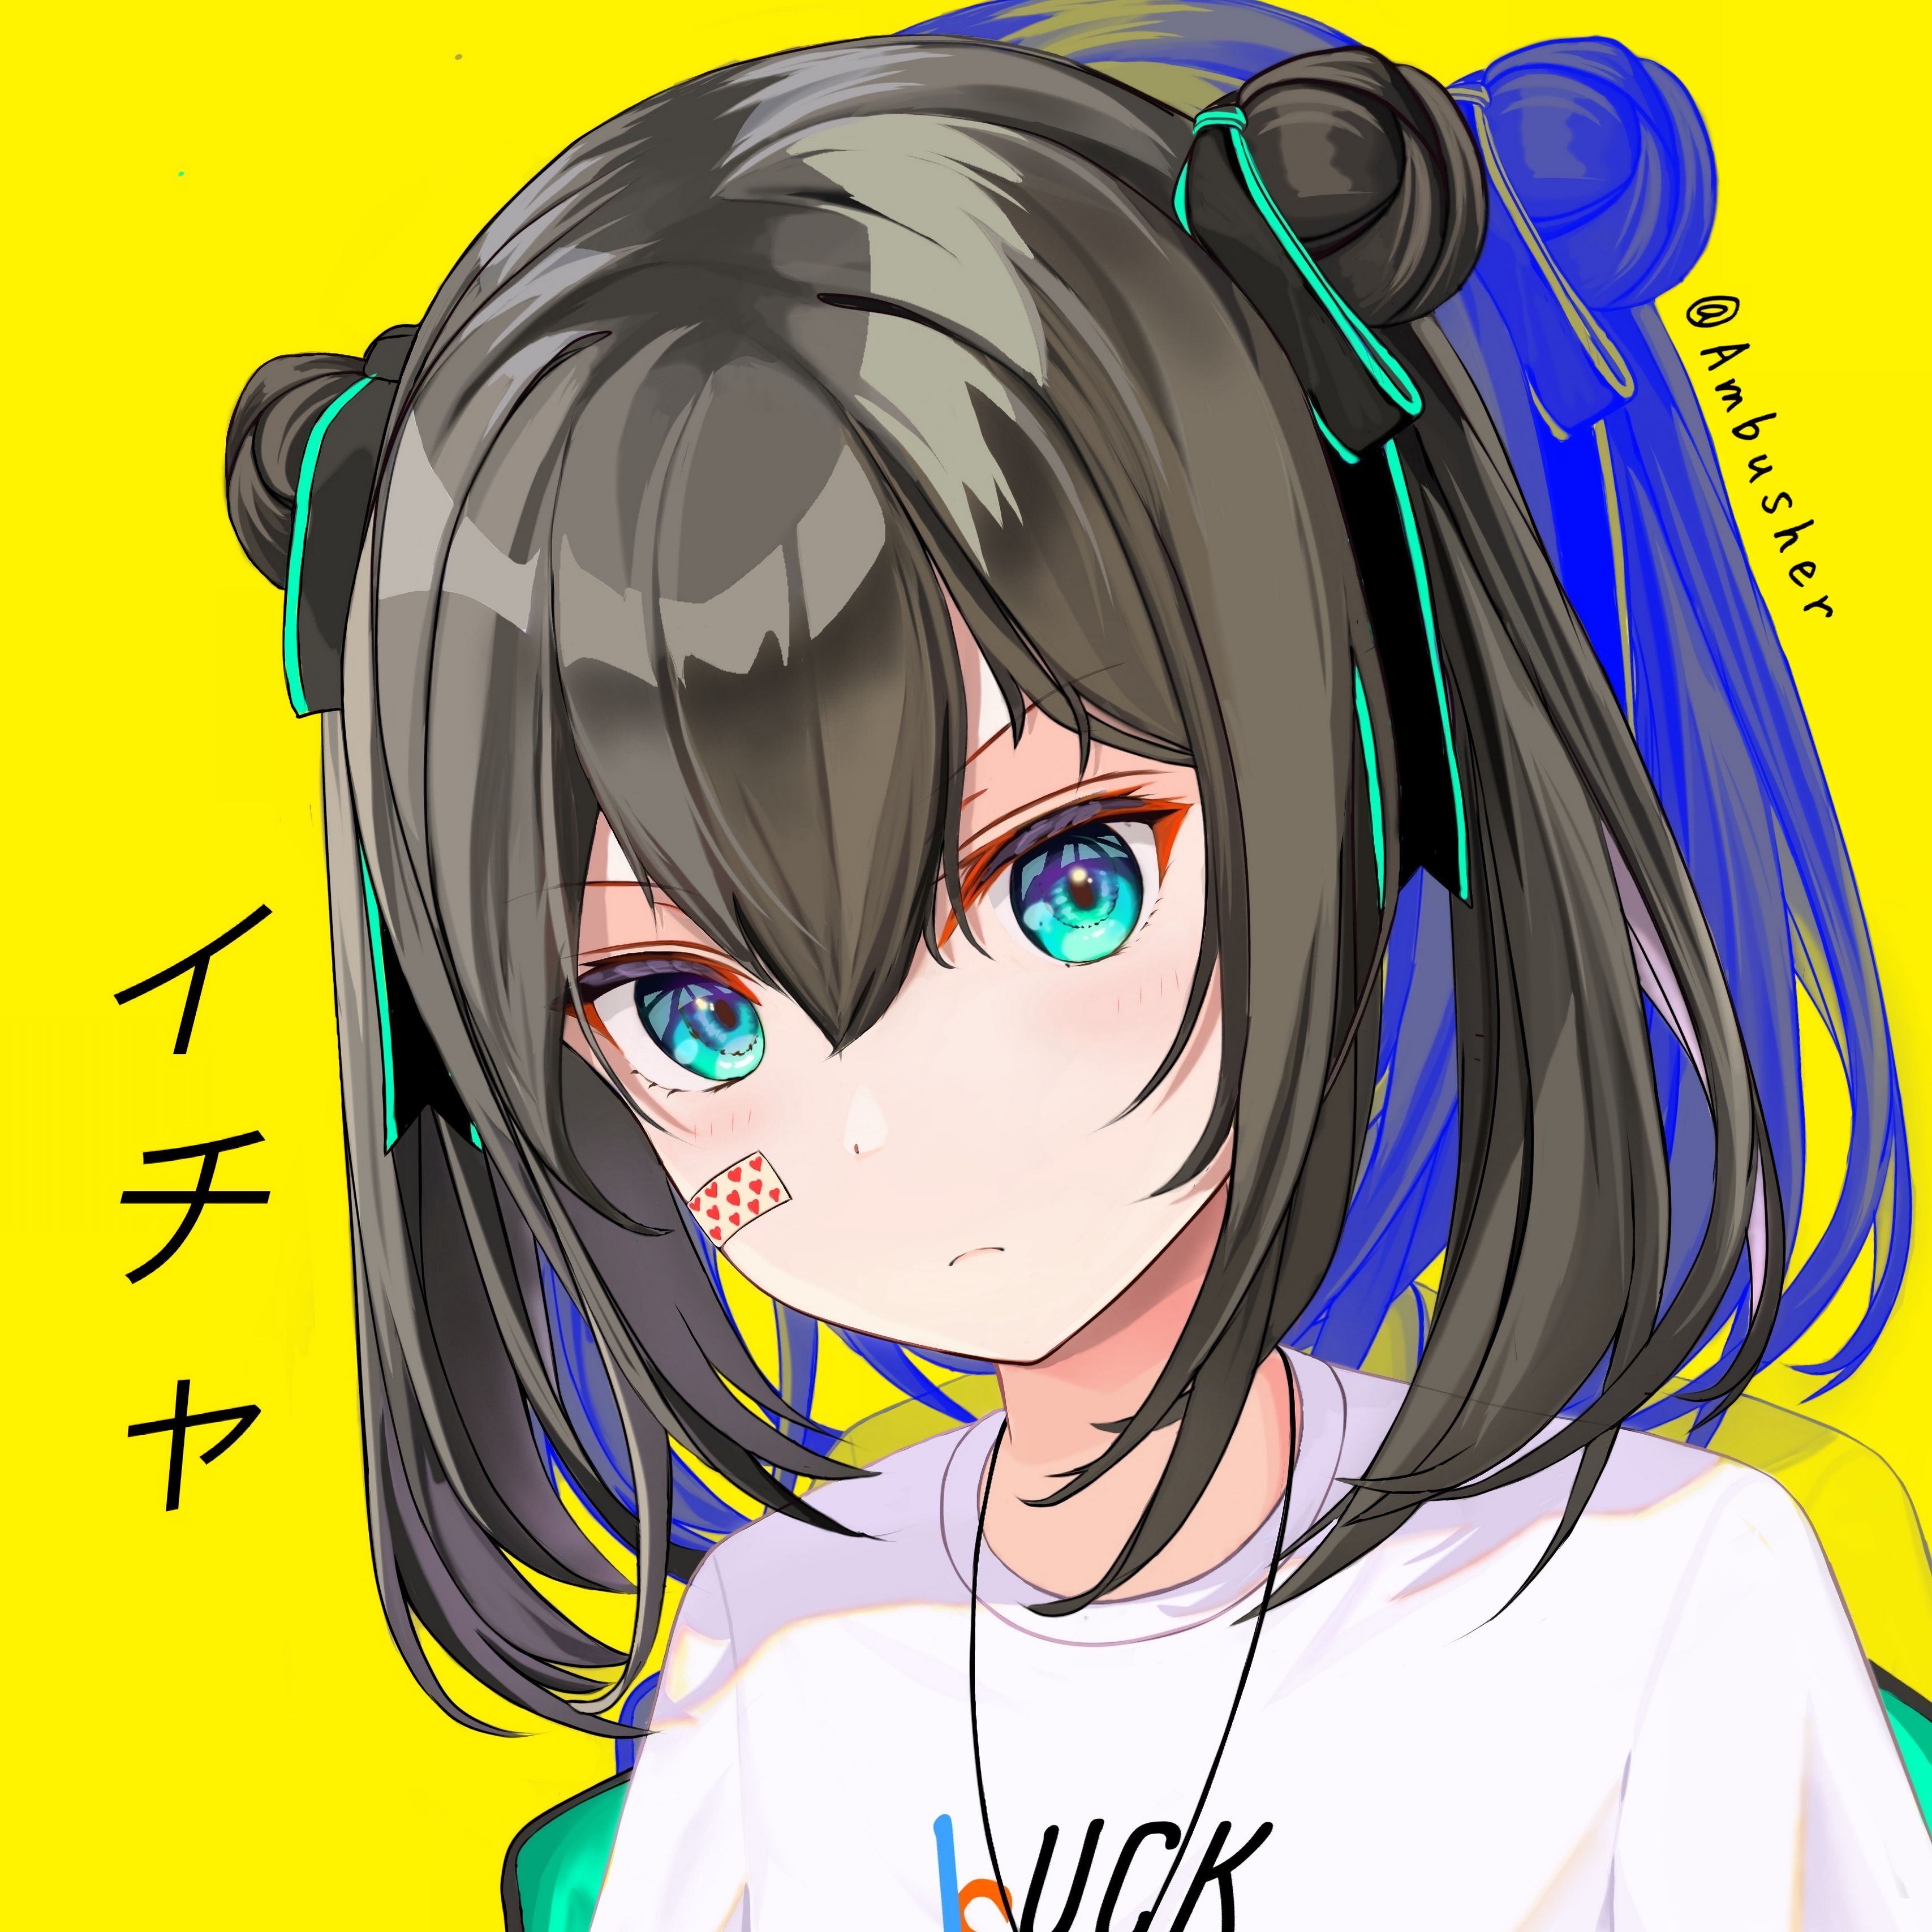 Colorful Shiny Bright Anime Girl theme Apk Download for Android- Latest  version 2.0.1- theme.colorful.bright.colorful.shiny.anime.girl.wallpaper